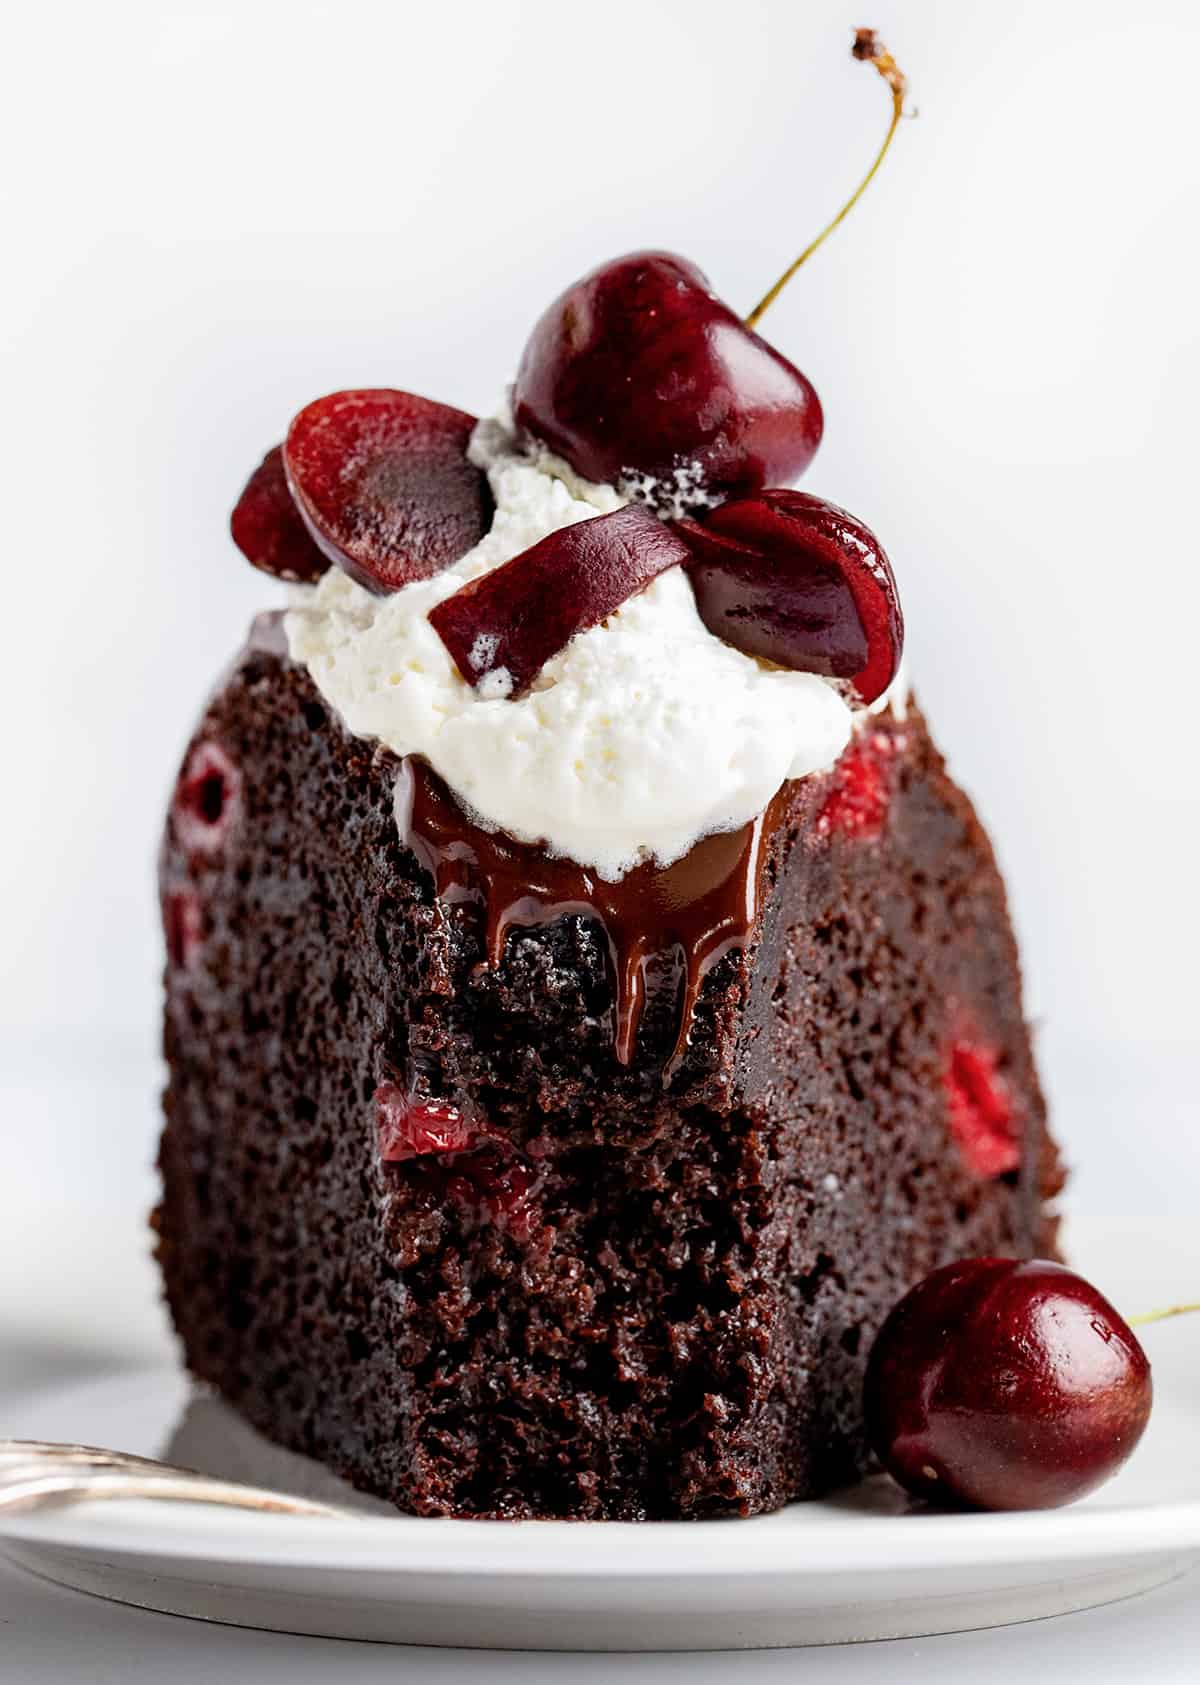 Piece of Black Forest Bundt Cake on a Plate Upright with a Bite Removed on a White Counter.